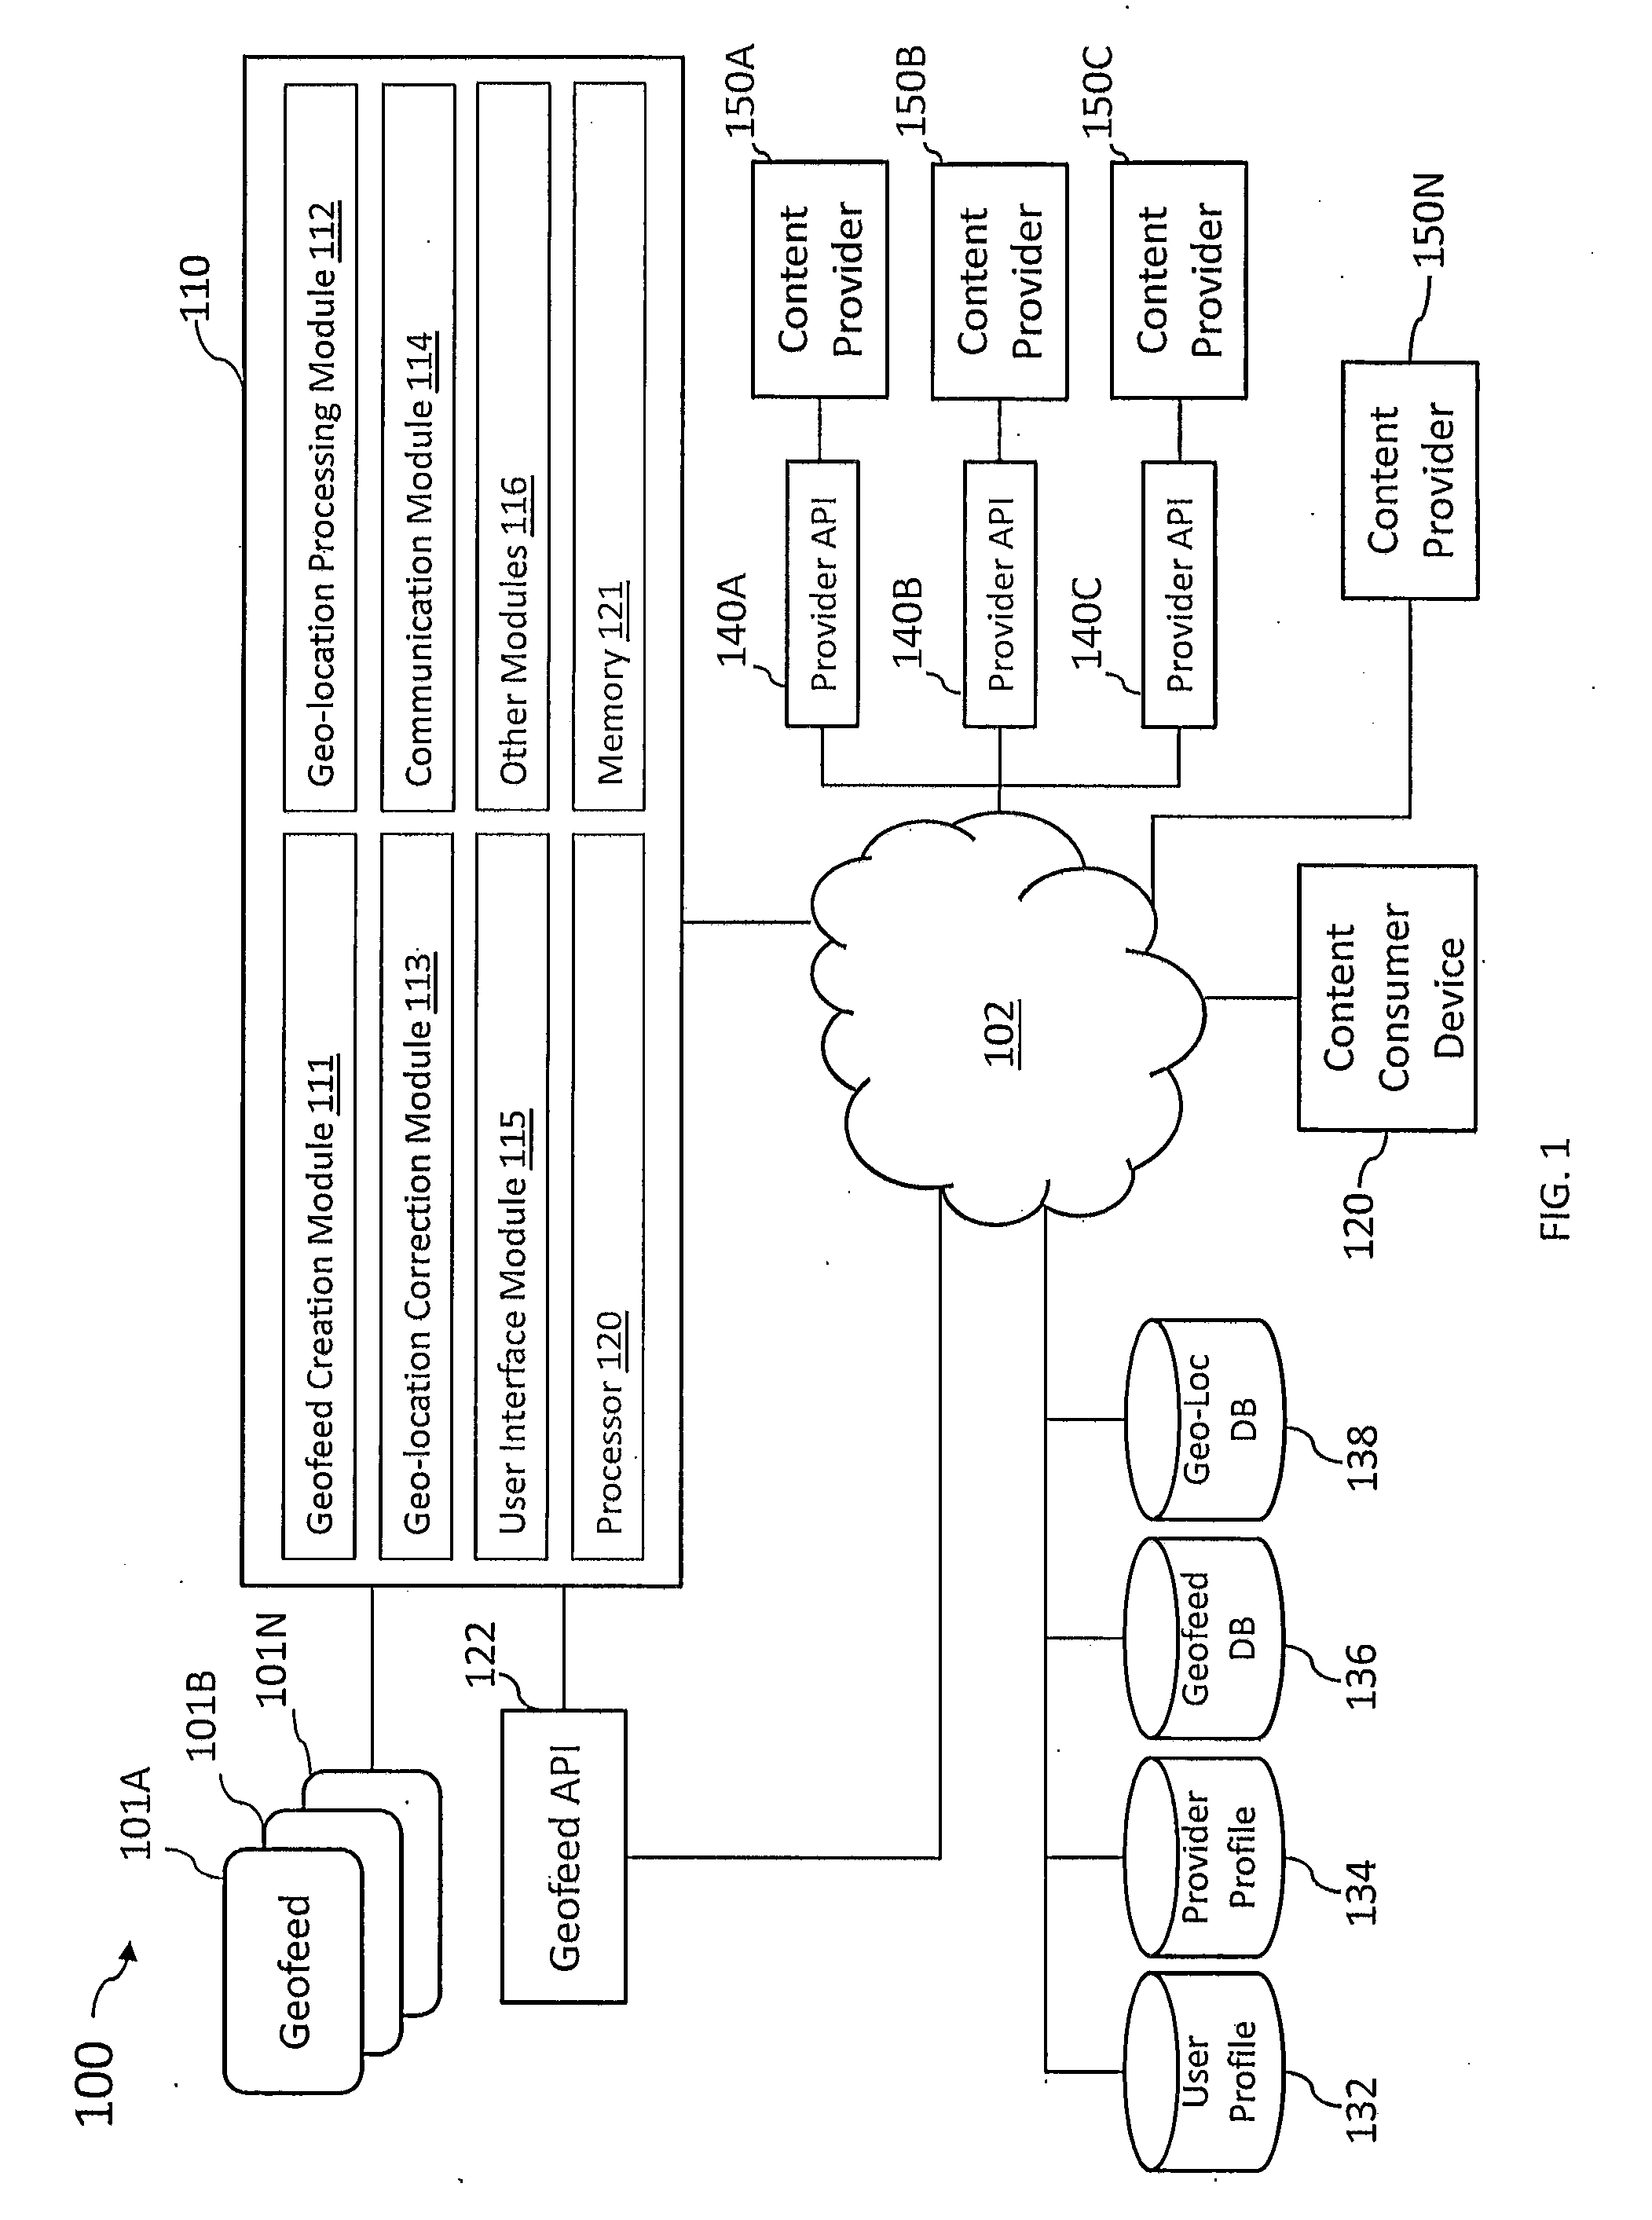 System and method for differentially processing a location input for content providers that use different location input formats